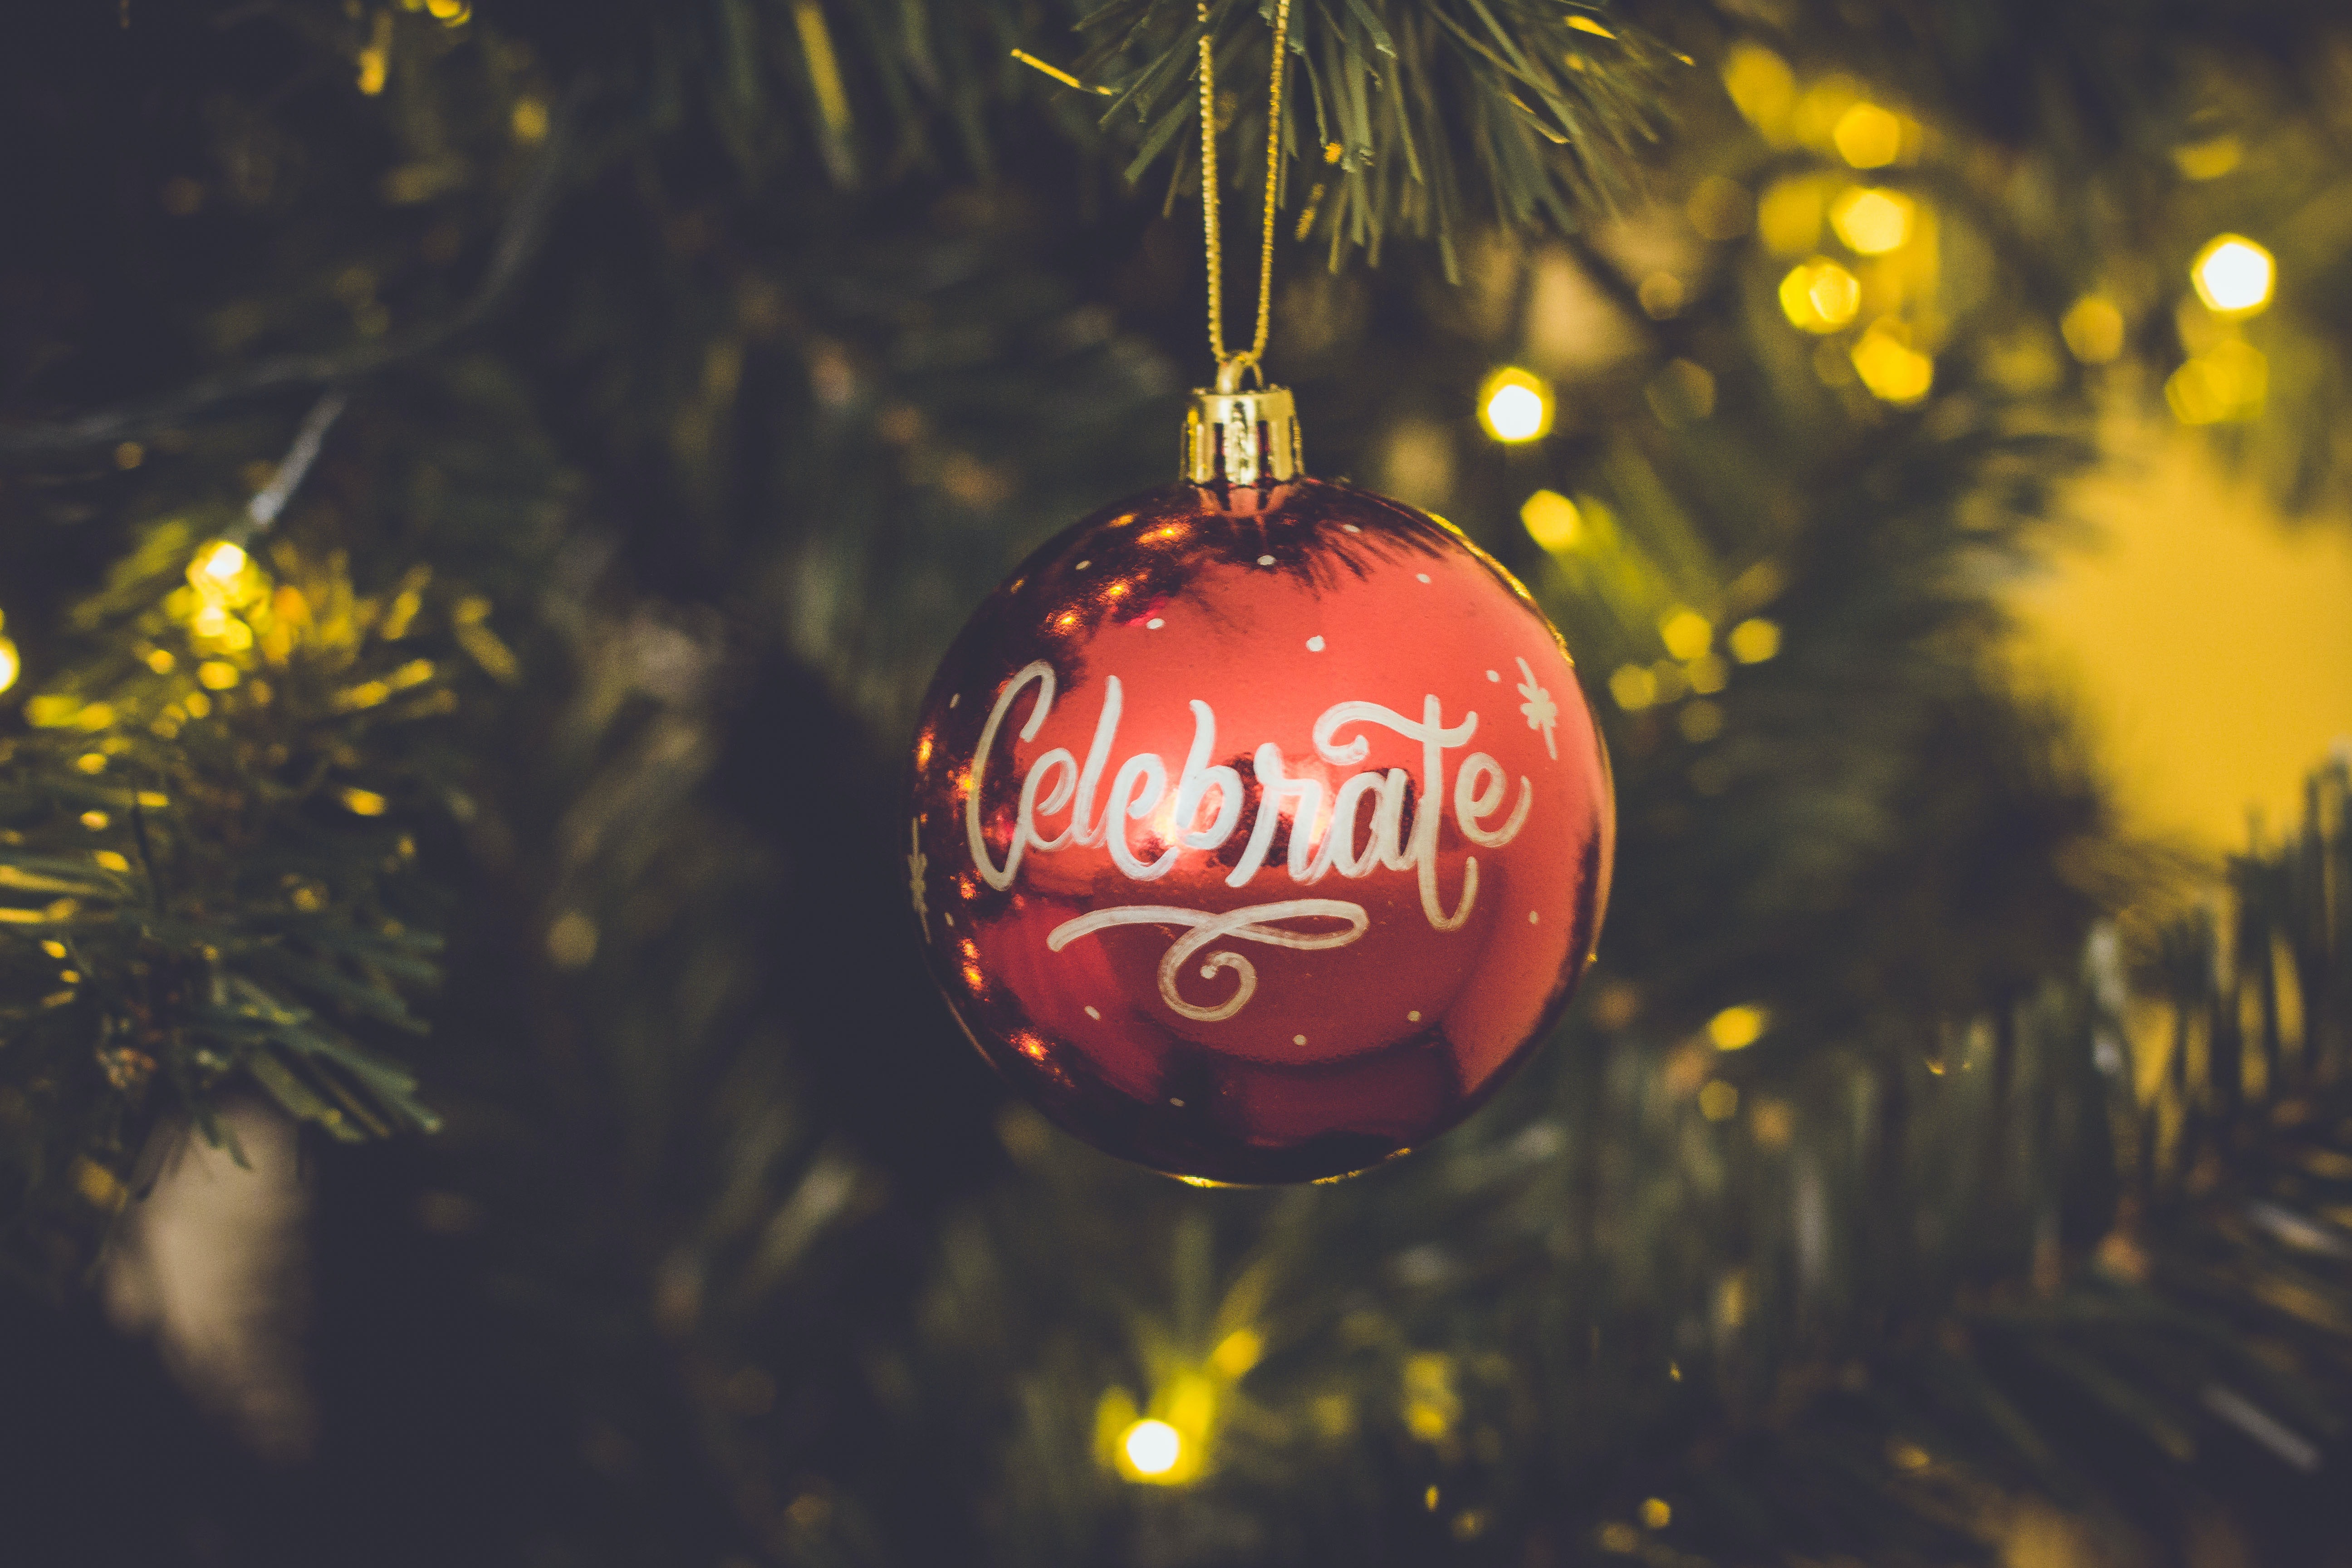 debt free Christmas tips for Christmas shopping on a tight budget 